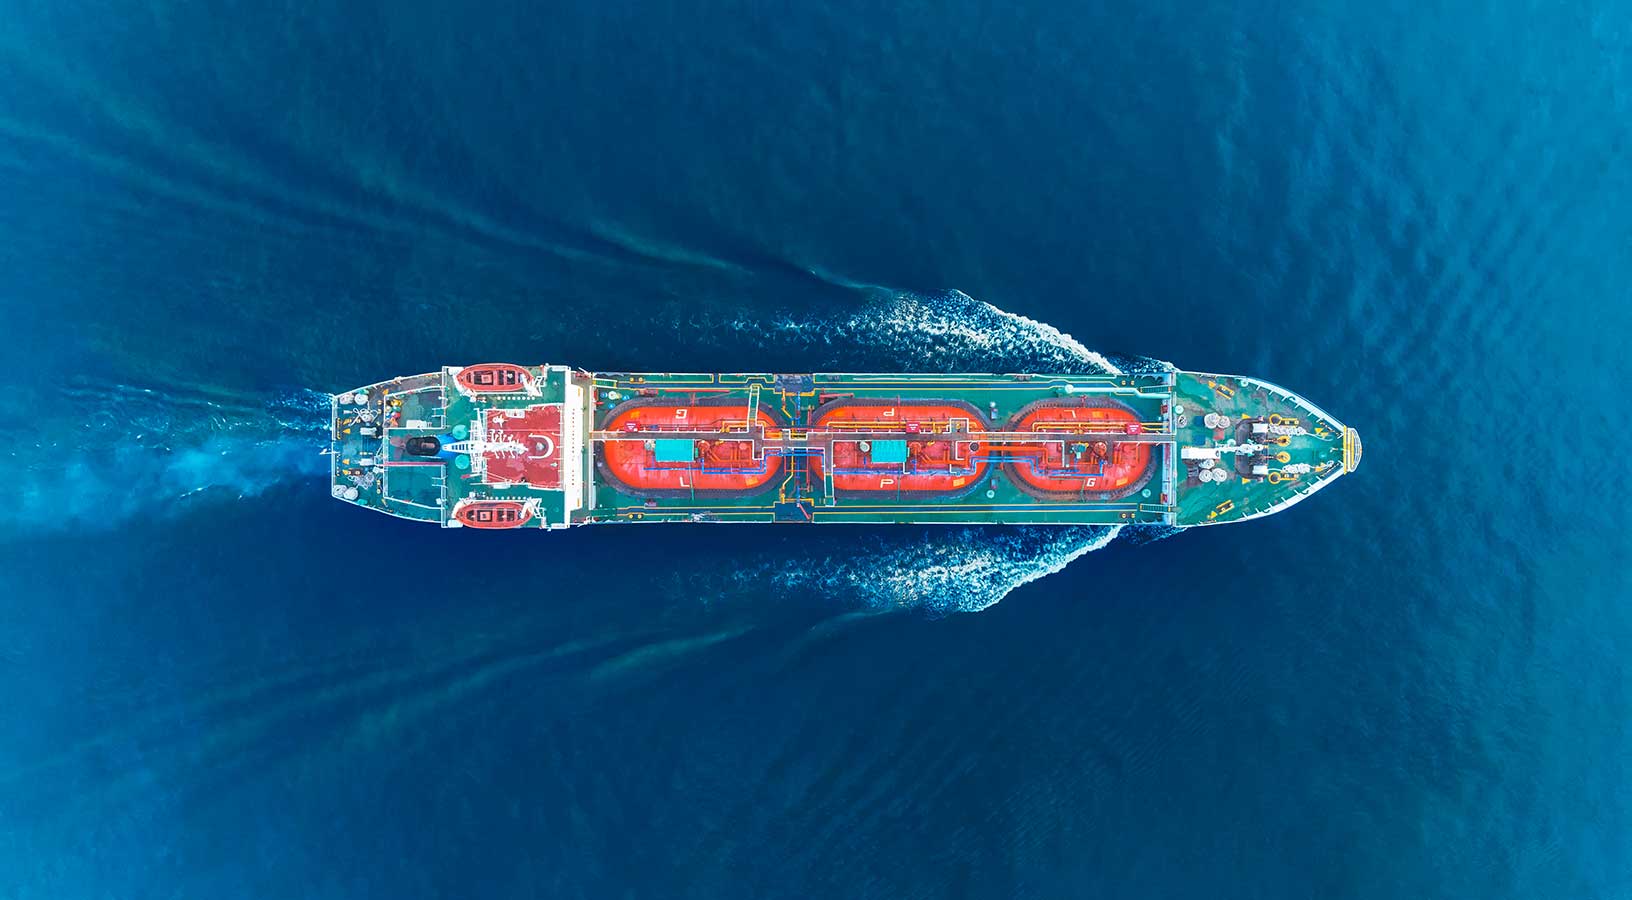 An aerial view of a dredging vessel navigating to the right of the image.